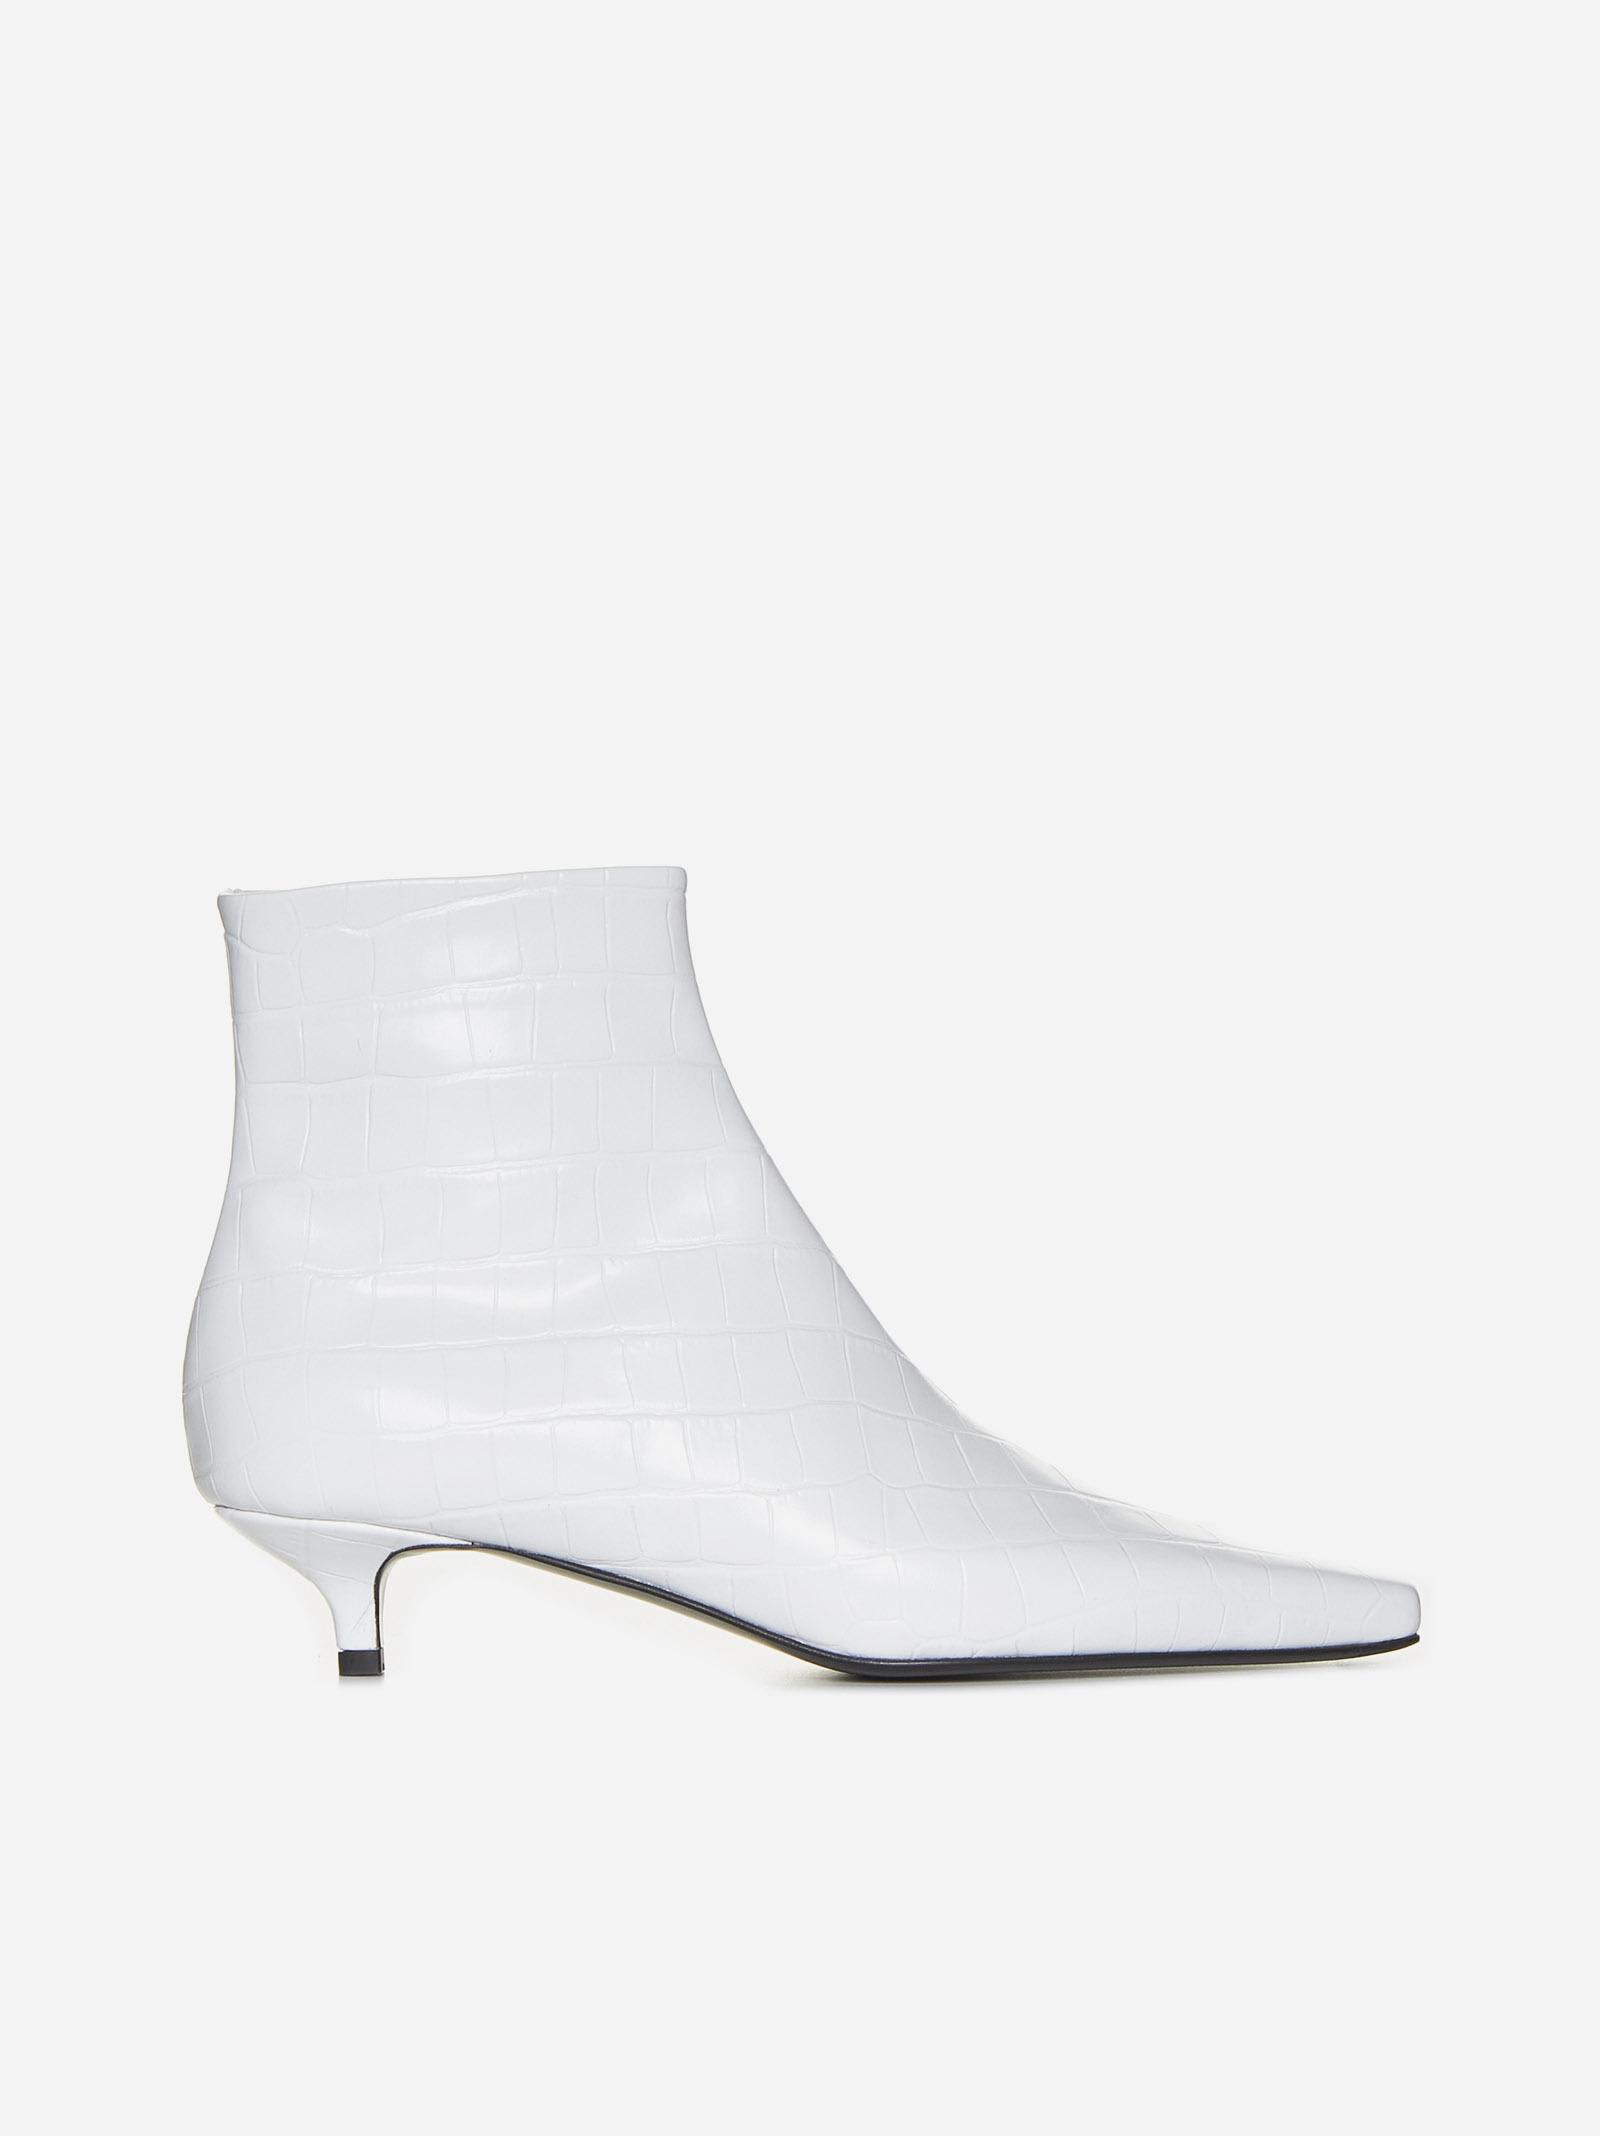 Totême The Croco Slim Leather Ankle Boots In White